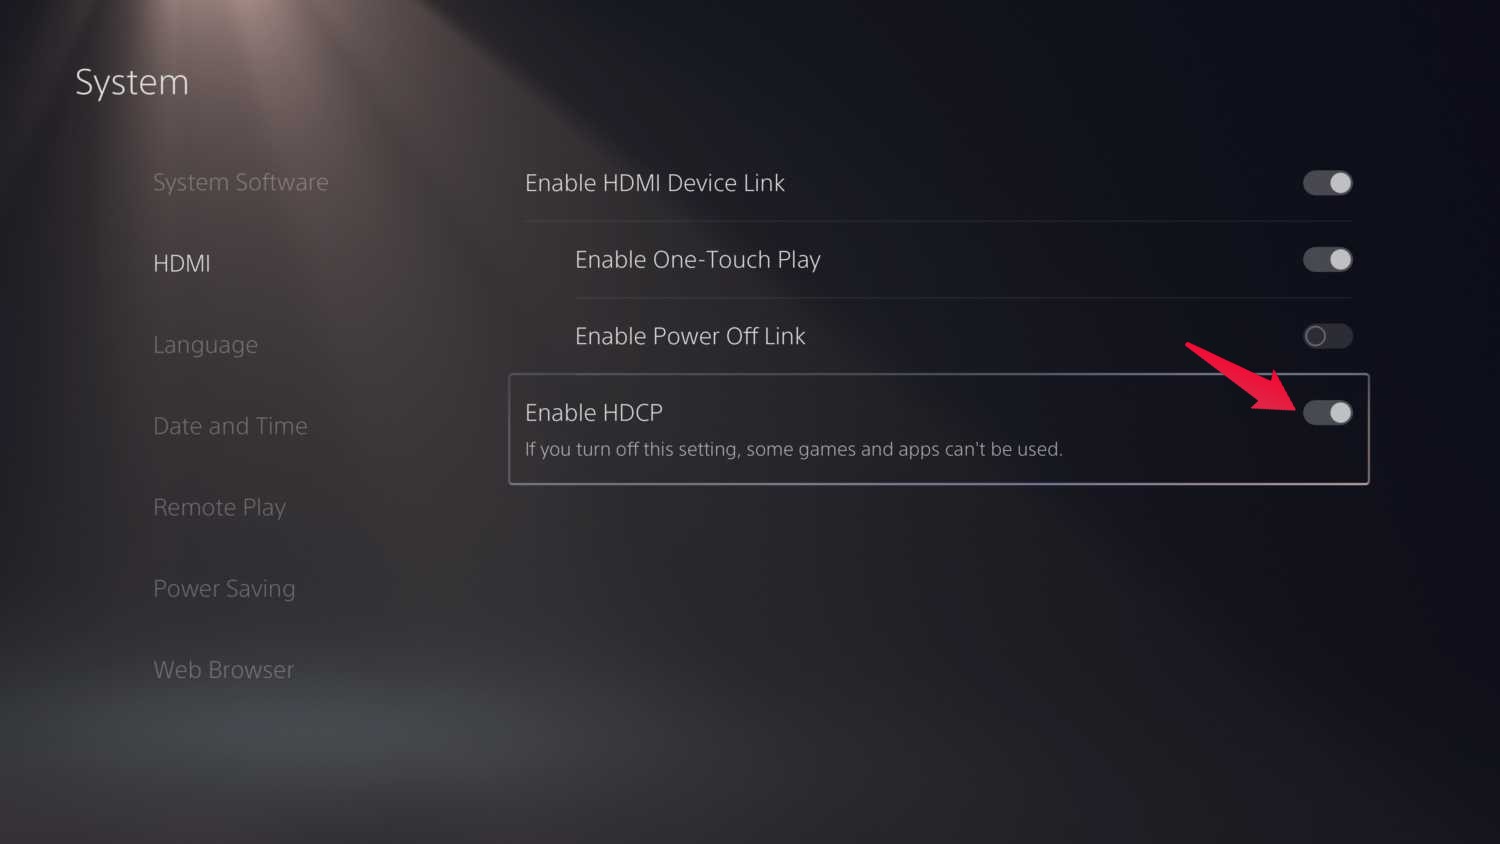 Enable HDPC